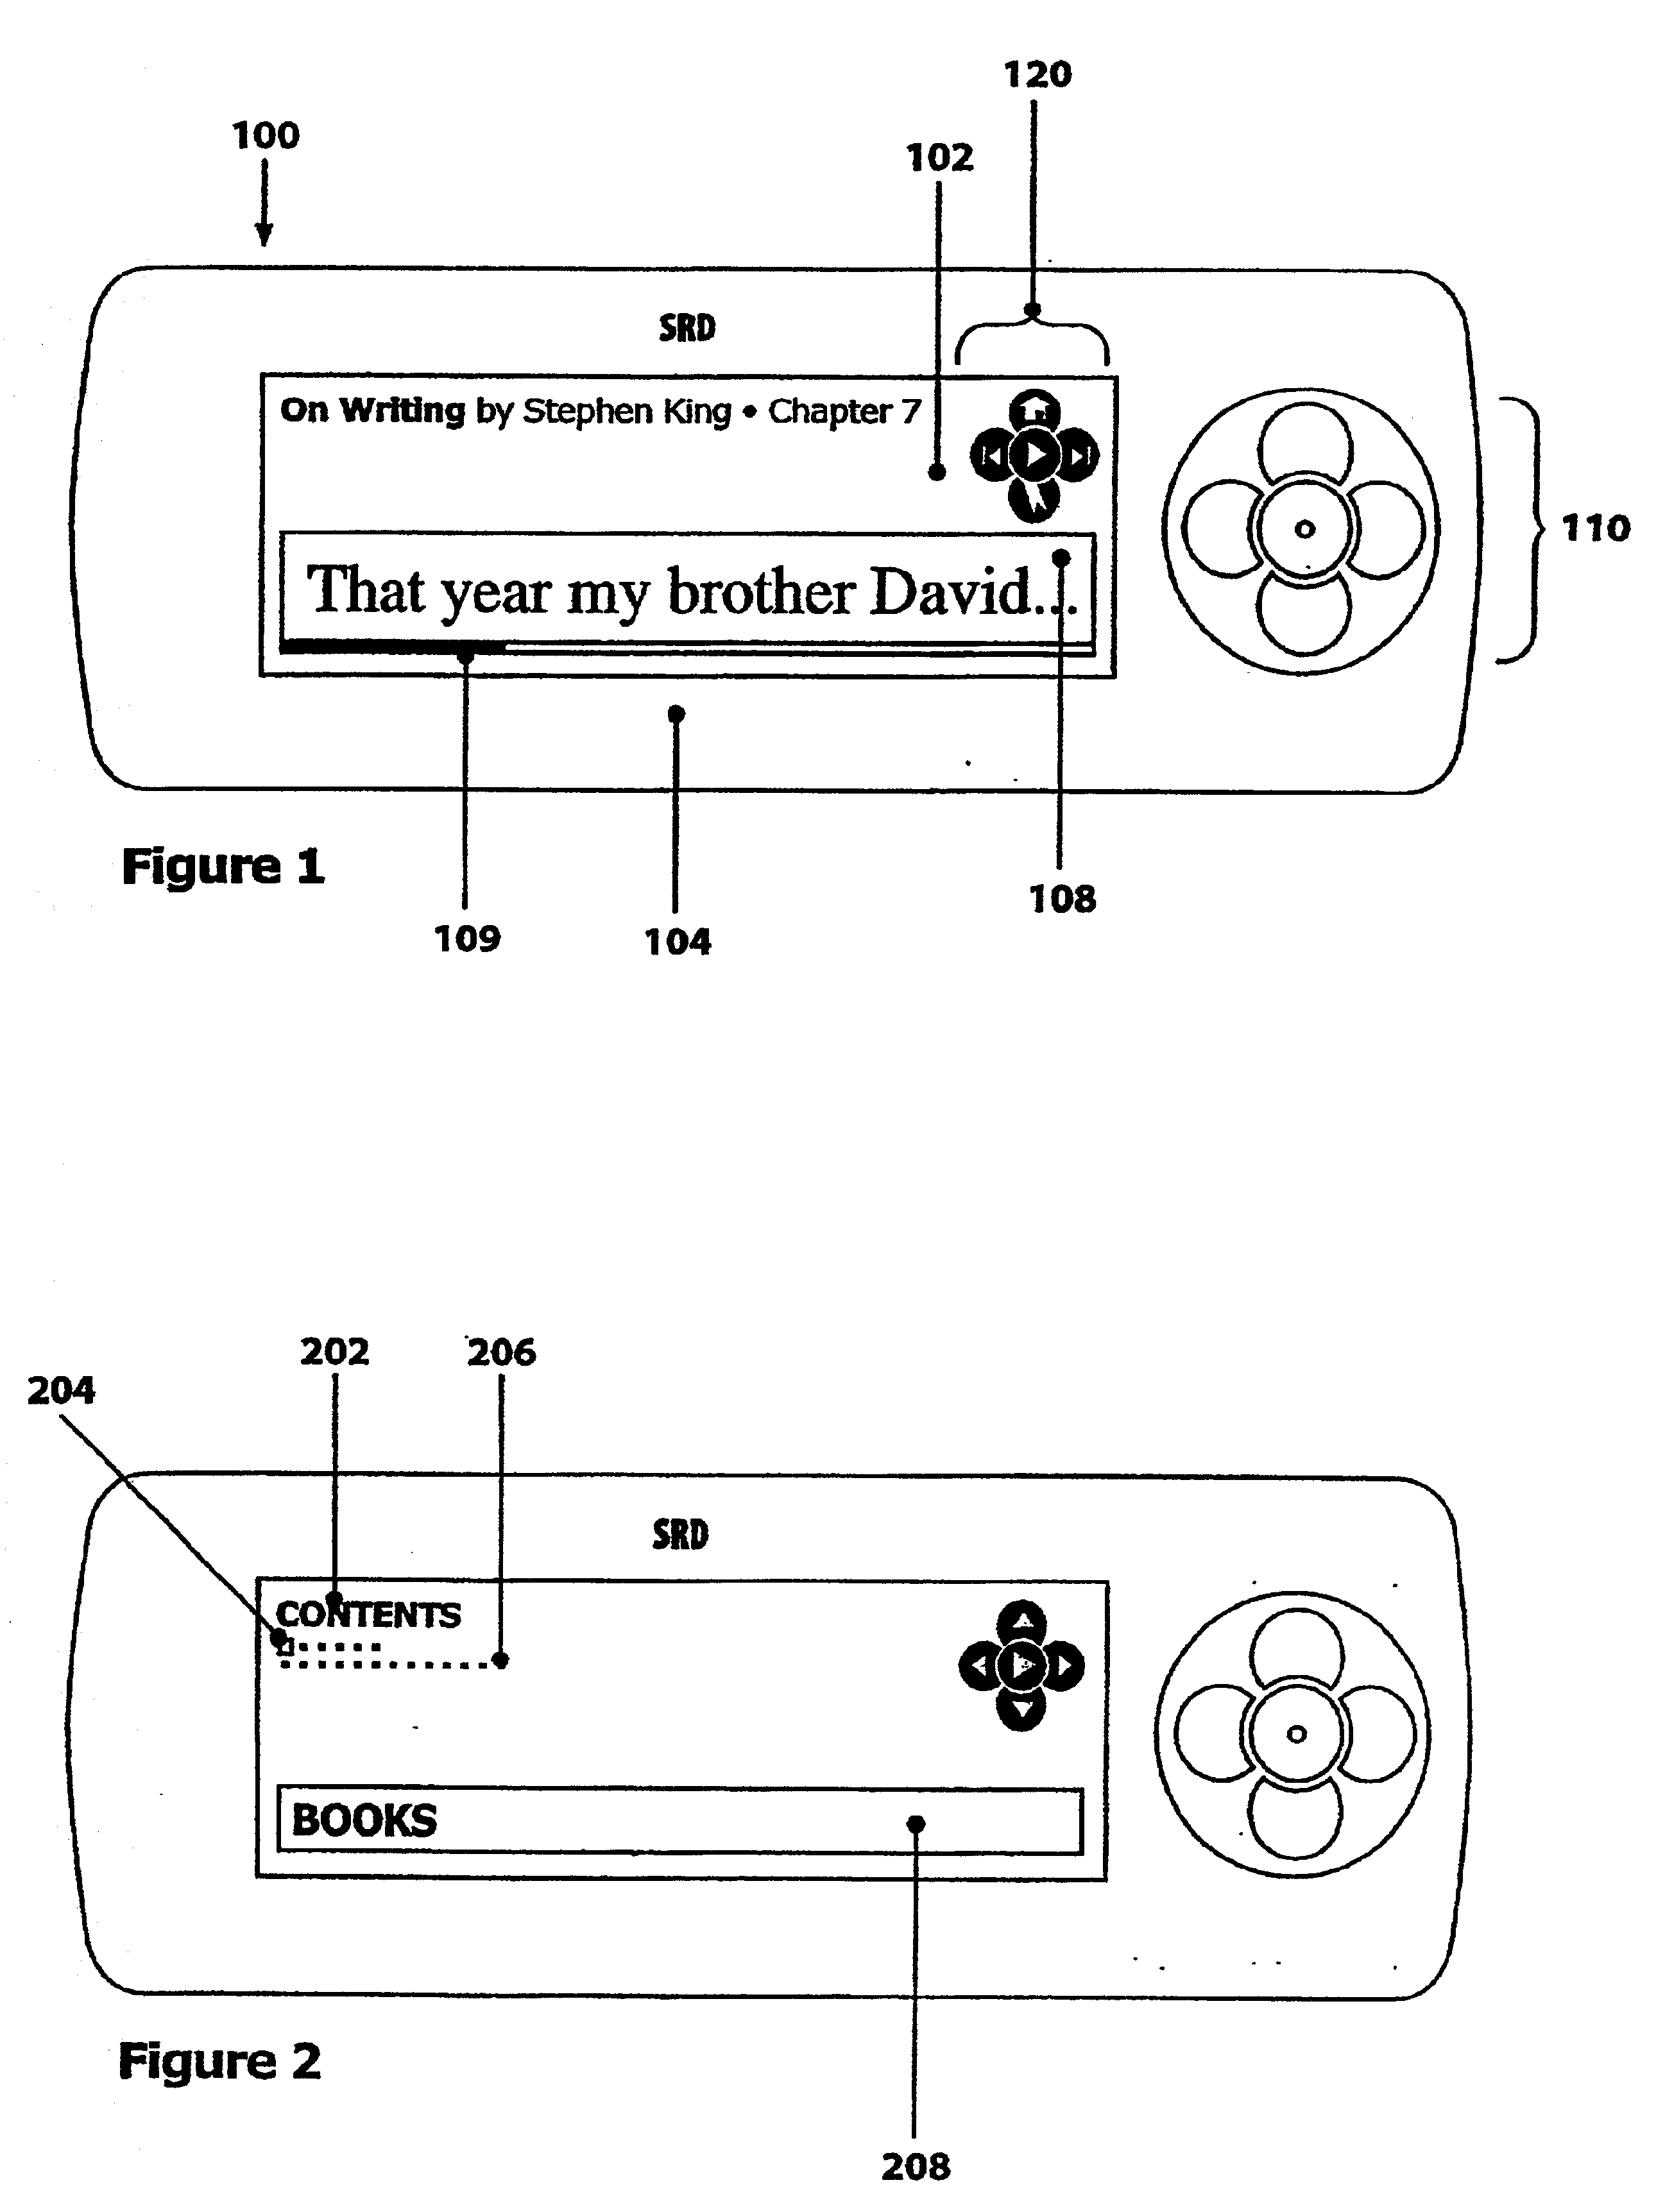 Strobe reading technology and device